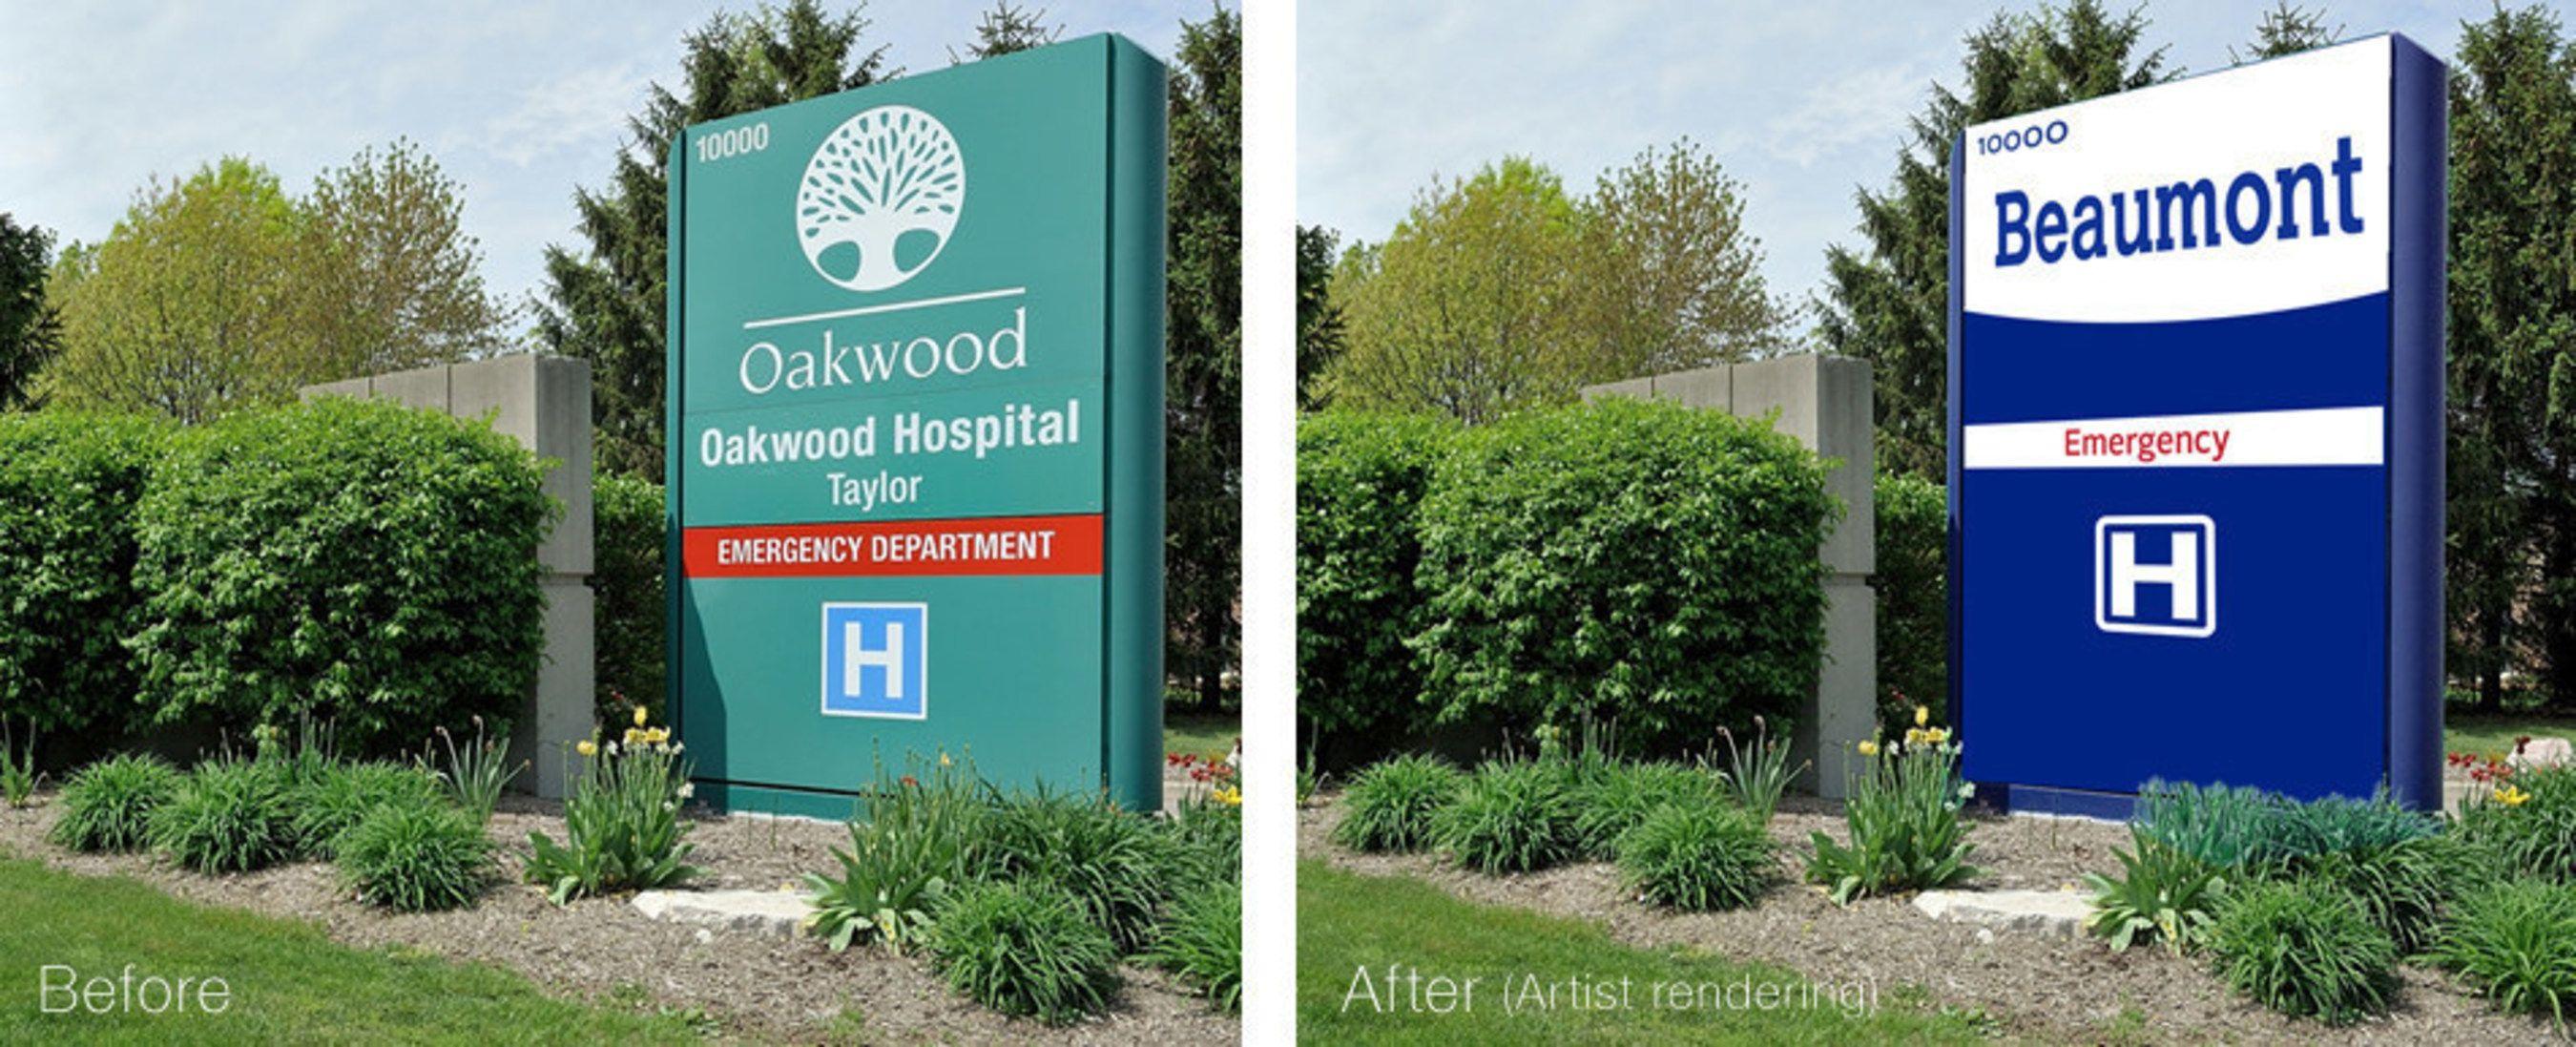 Beaumont Hospital Logo - Beaumont Health finalizes logo, color and hospital names